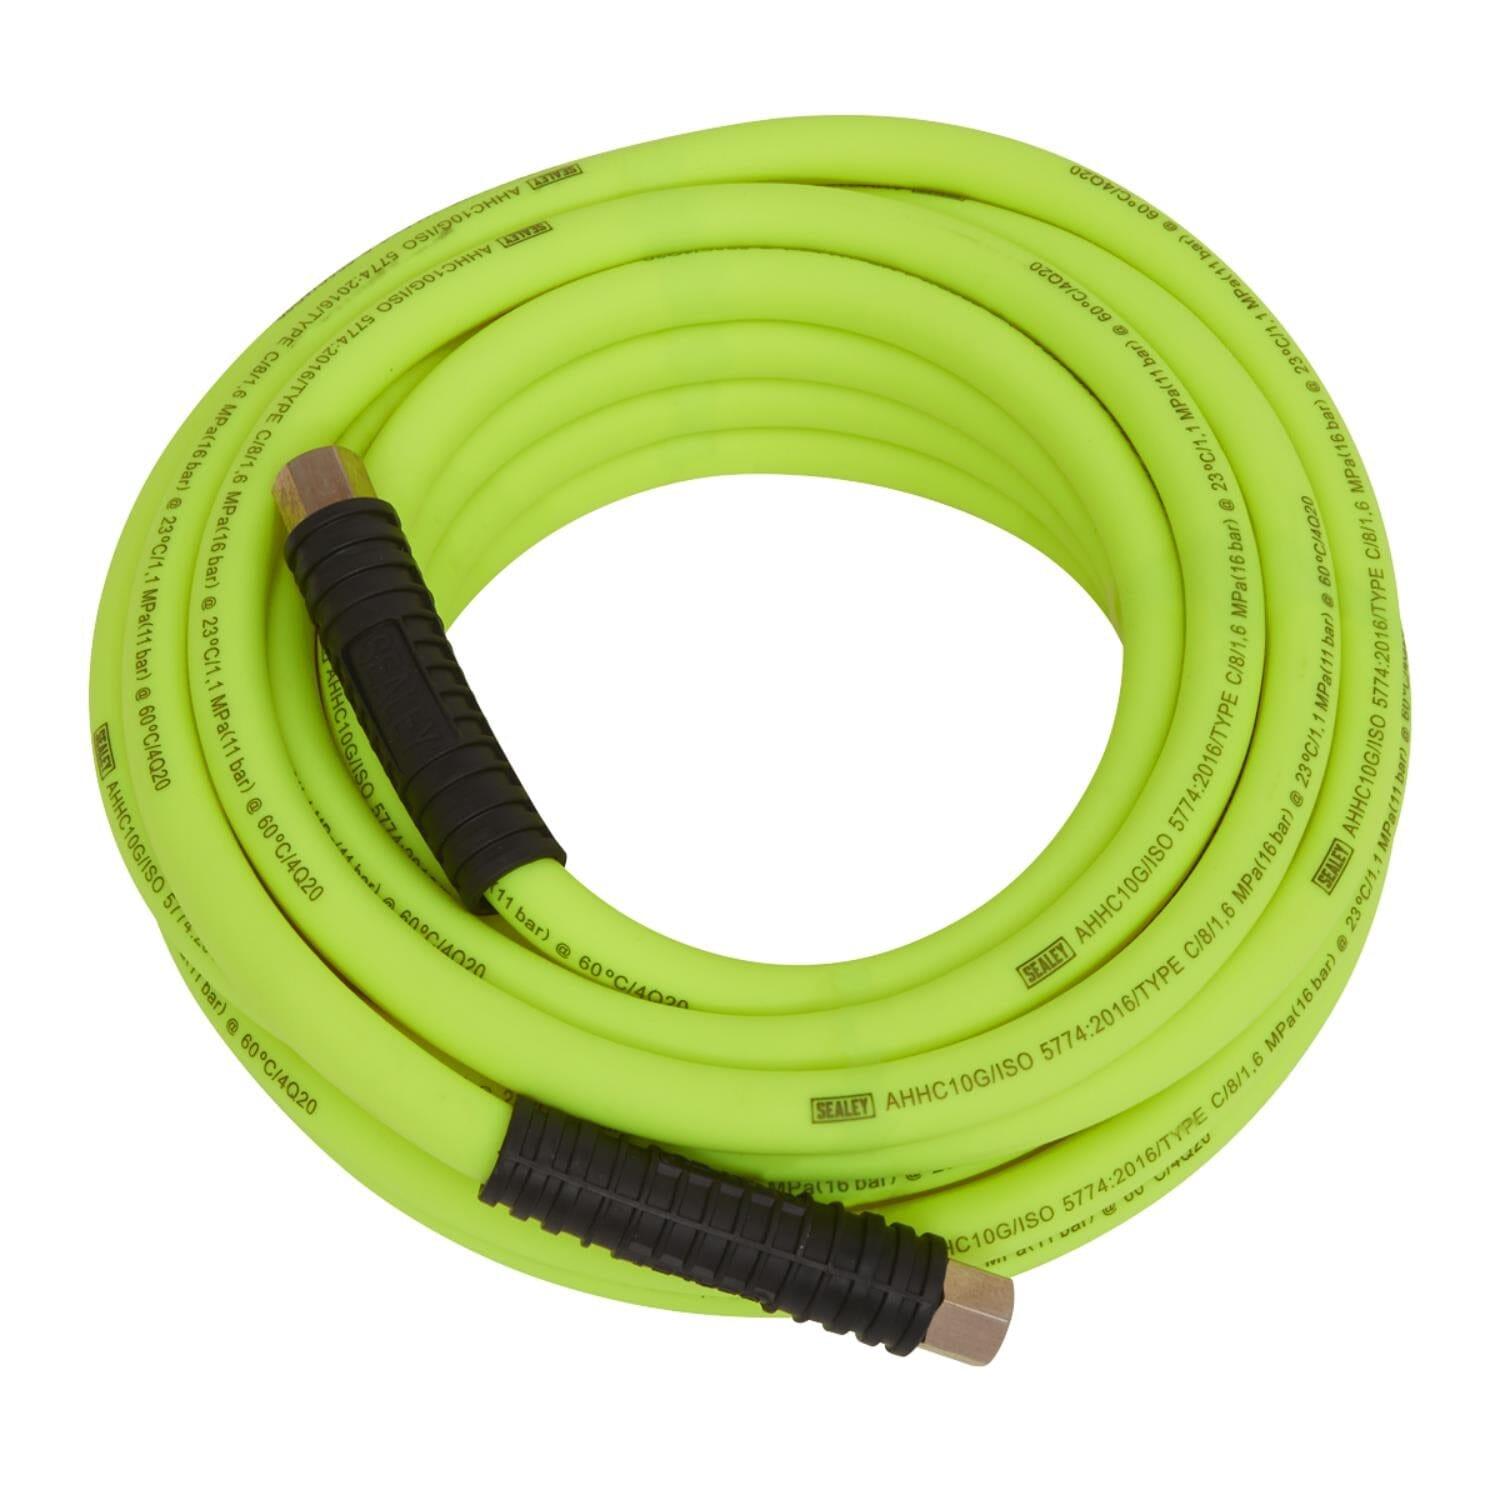 Sealey Air Hose 10m x 8mm Hybrid High-Visibility with 1/4" BSP Unions AHHC10G - Tools 2U Direct SW